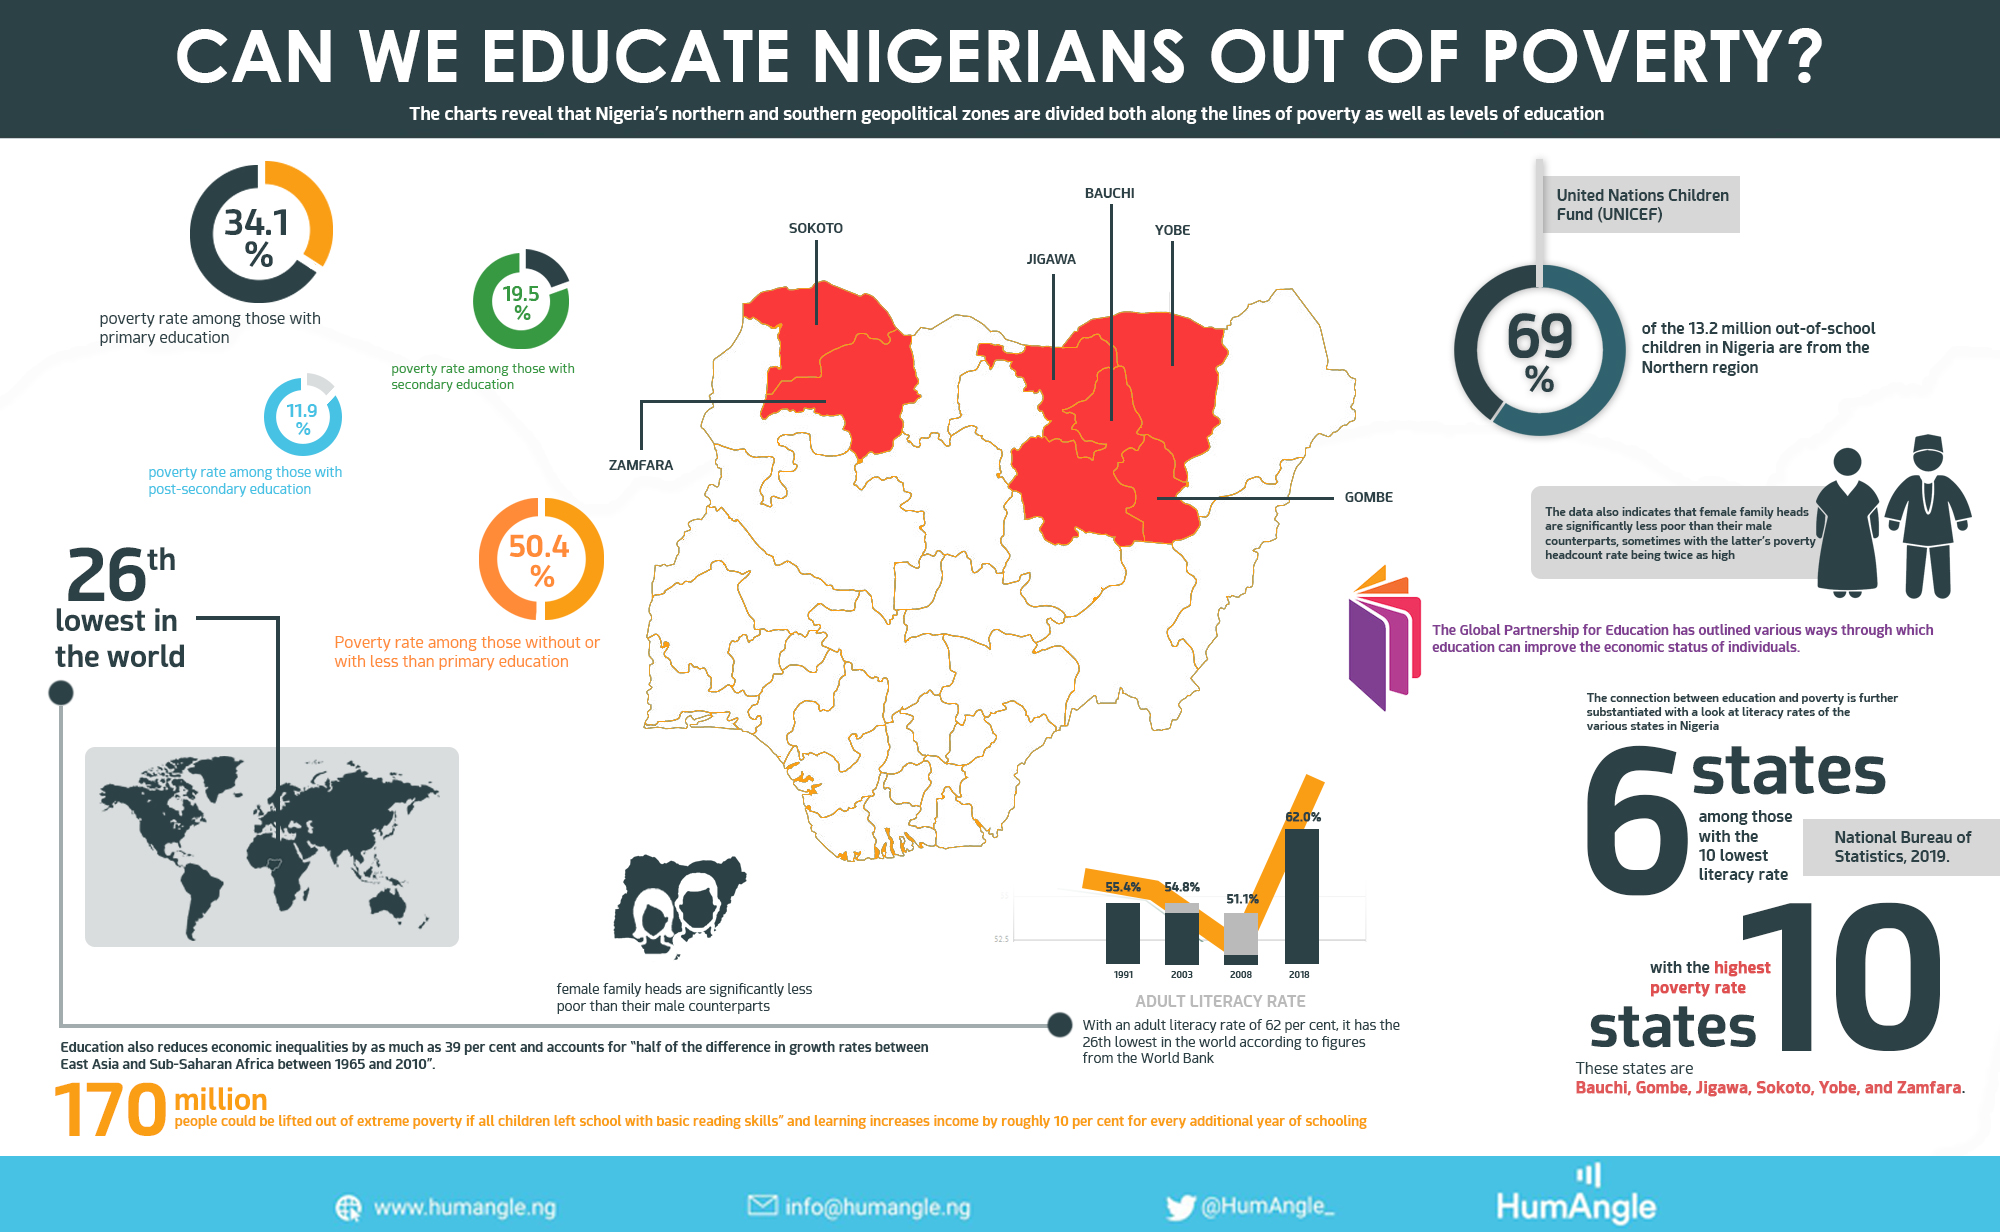 Can we educate Nigerians out of poverty?